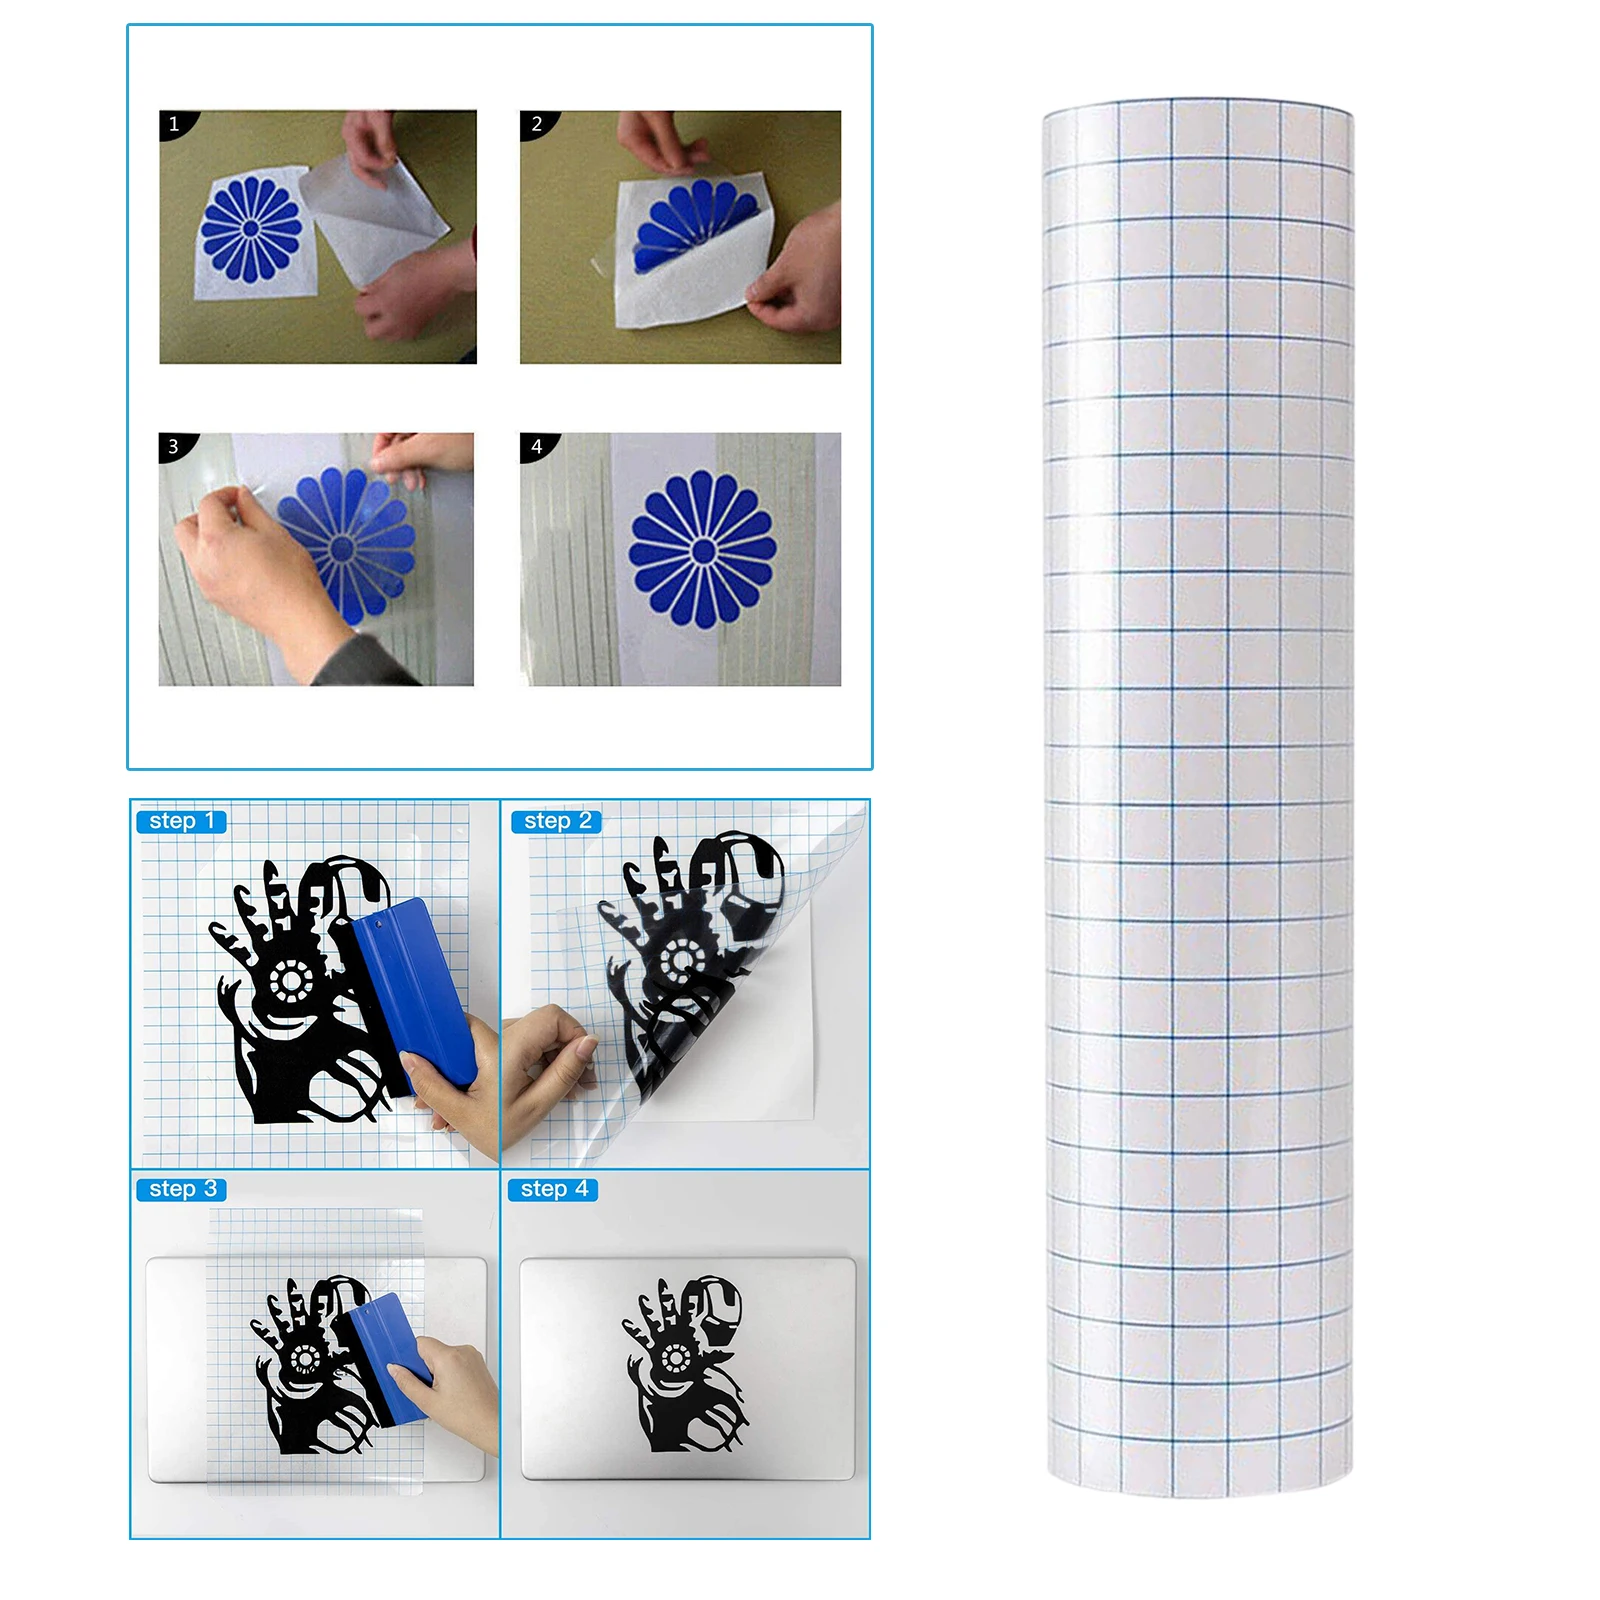 Clear Adhesive Vinyl Transfer Paper Tape Roll for Decals Signs Windows Sticker